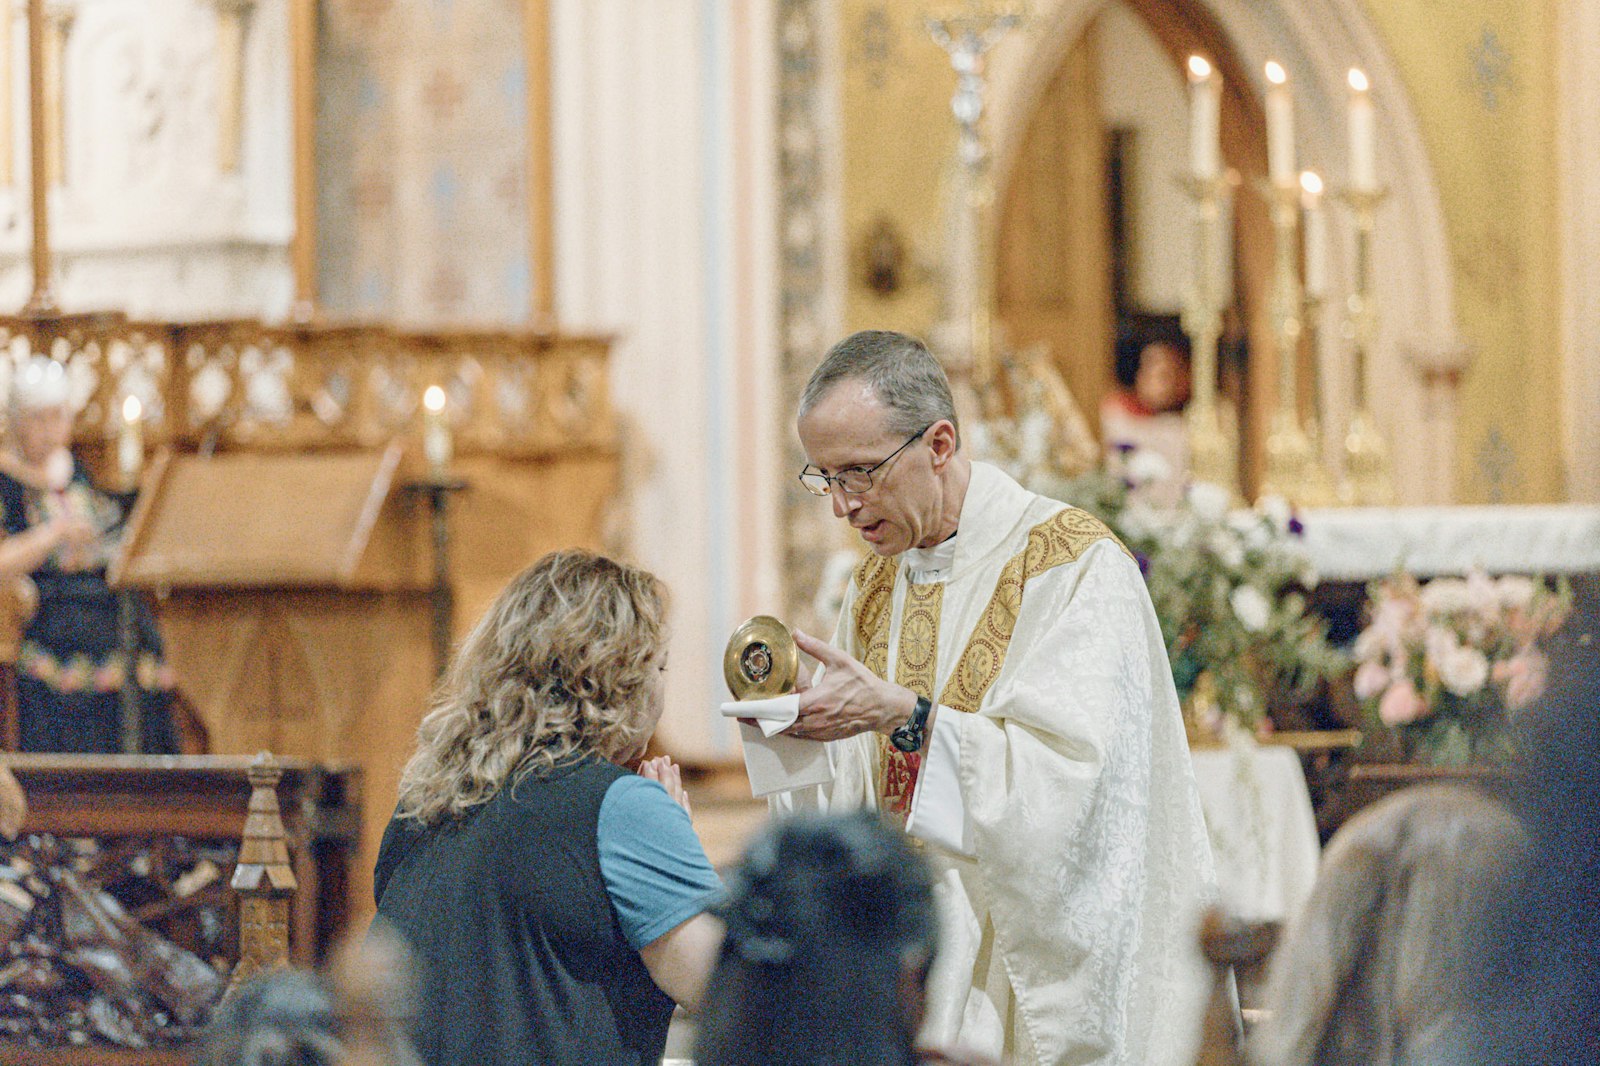 Fr. John Herman, CSC, a priest serving at the Basilica of Ste. Anne, offers a first-class relic of St. Anne for veneration after Mass.